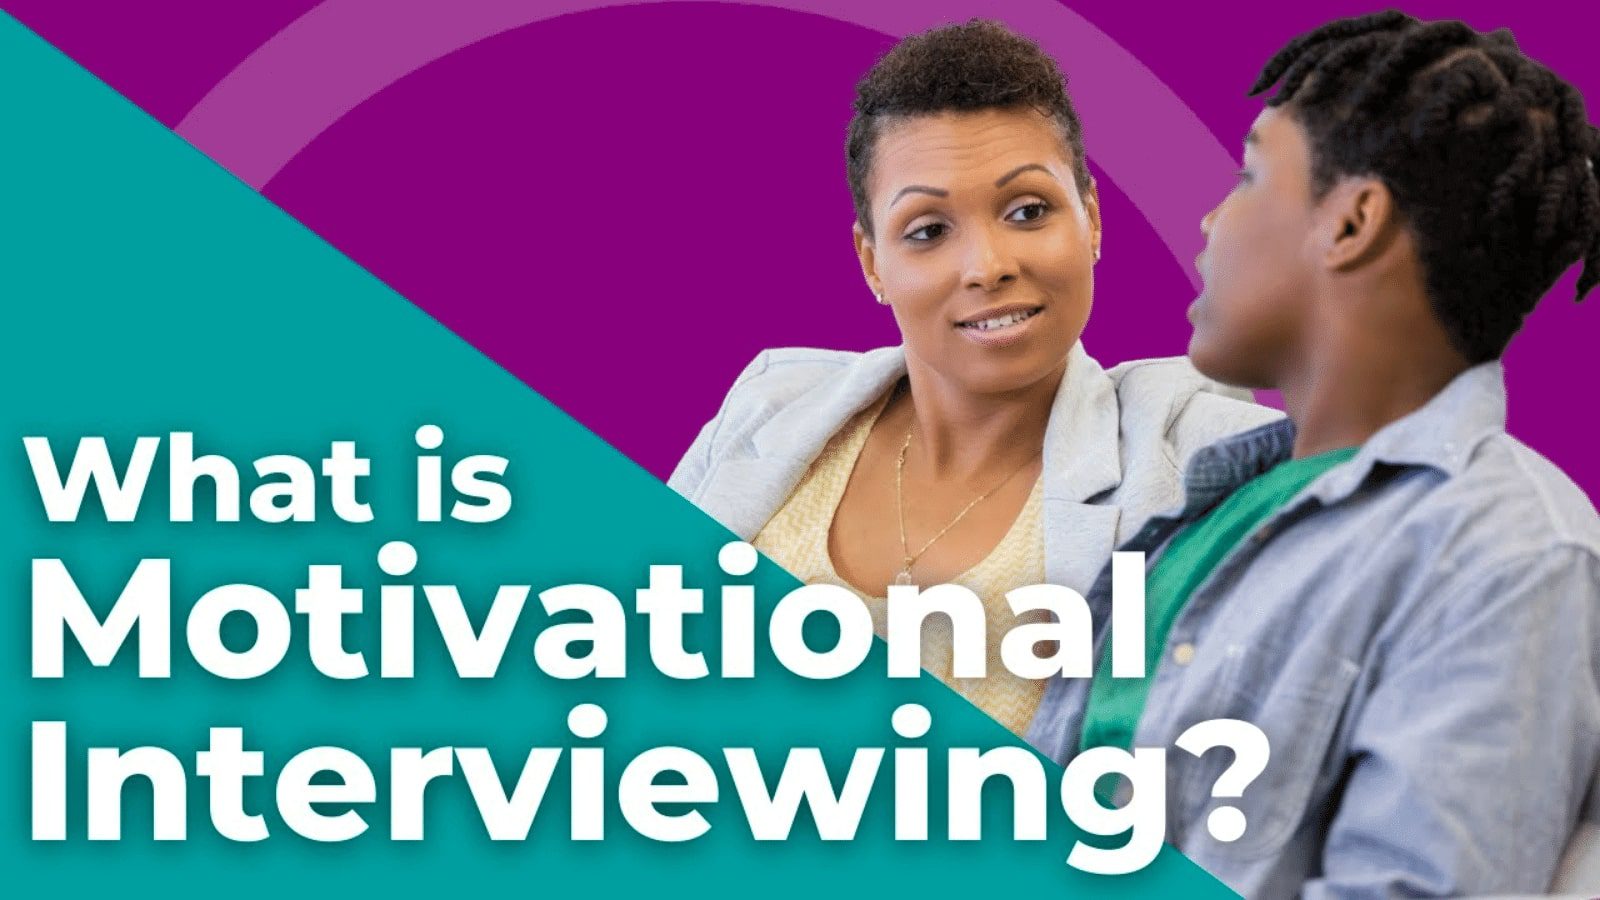 What is Motivational Interviewing? Video thumbnail